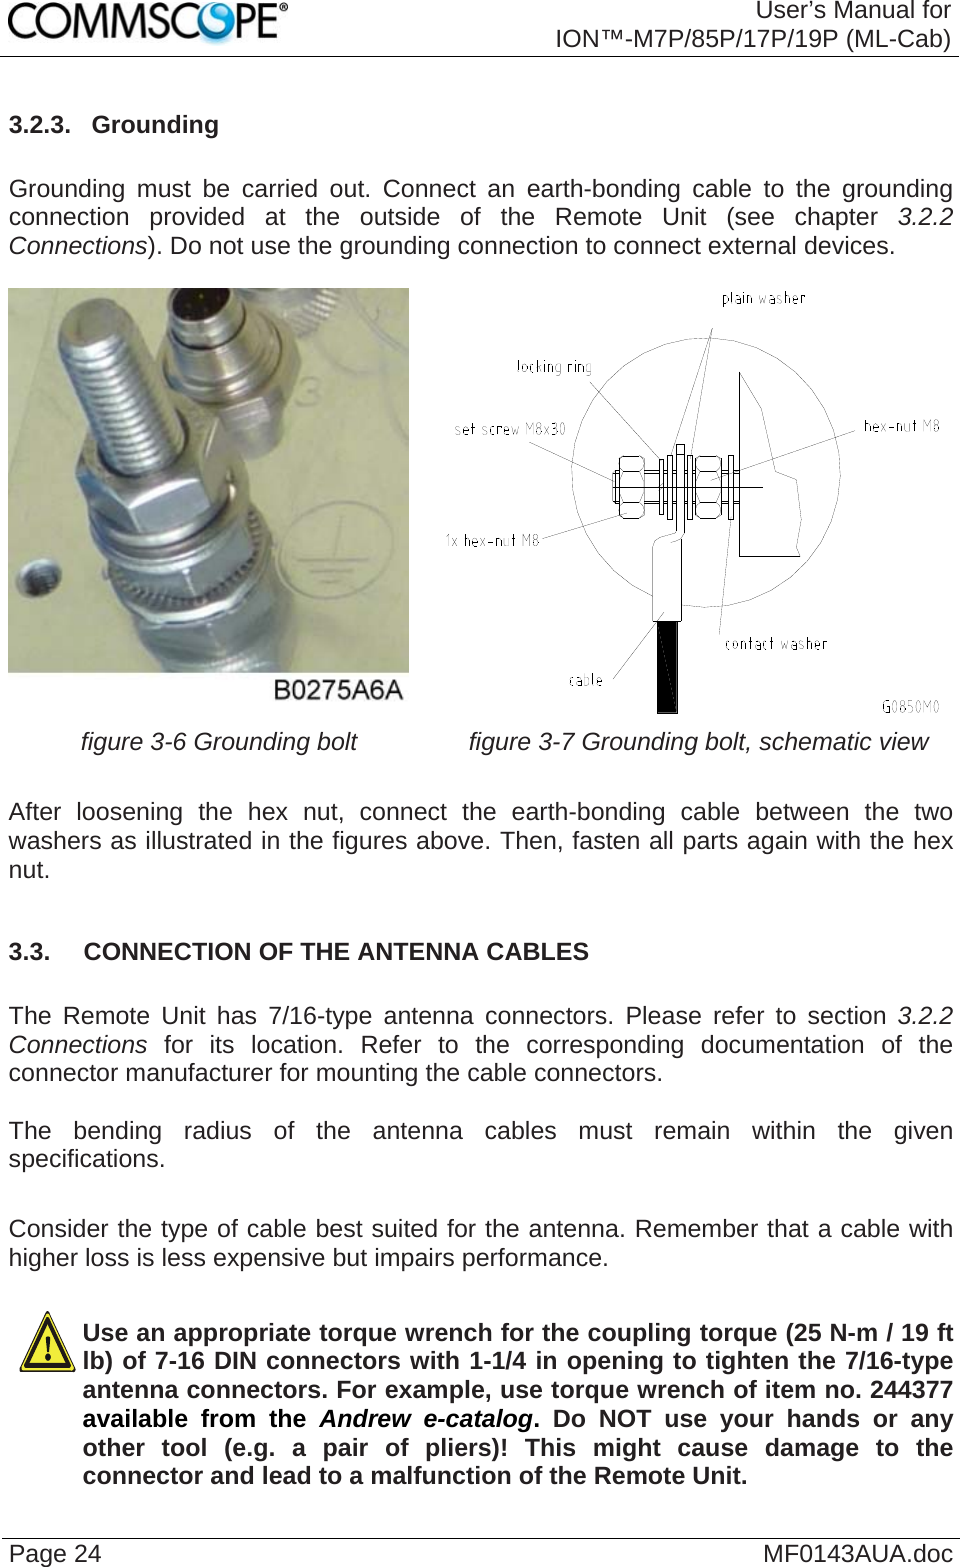  User’s Manual for ION™-M7P/85P/17P/19P (ML-Cab) Page 24  MF0143AUA.doc3.2.3.  Grounding  Grounding must be carried out. Connect an earth-bonding cable to the grounding connection provided at the outside of the Remote Unit (see chapter  3.2.2 Connections). Do not use the grounding connection to connect external devices.    figure 3-6 Grounding bolt  figure 3-7 Grounding bolt, schematic view  After loosening the hex nut, connect the earth-bonding cable between the two washers as illustrated in the figures above. Then, fasten all parts again with the hex nut.  3.3.  CONNECTION OF THE ANTENNA CABLES  The Remote Unit has 7/16-type antenna connectors. Please refer to section 3.2.2 Connections for its location. Refer to the corresponding documentation of the connector manufacturer for mounting the cable connectors.   The bending radius of the antenna cables must remain within the given specifications.   Consider the type of cable best suited for the antenna. Remember that a cable with higher loss is less expensive but impairs performance.  Use an appropriate torque wrench for the coupling torque (25 N-m / 19 ft lb) of 7-16 DIN connectors with 1-1/4 in opening to tighten the 7/16-type antenna connectors. For example, use torque wrench of item no. 244377 available from the Andrew e-catalog.  Do NOT use your hands or any other tool (e.g. a pair of pliers)! This might cause damage to the connector and lead to a malfunction of the Remote Unit.  